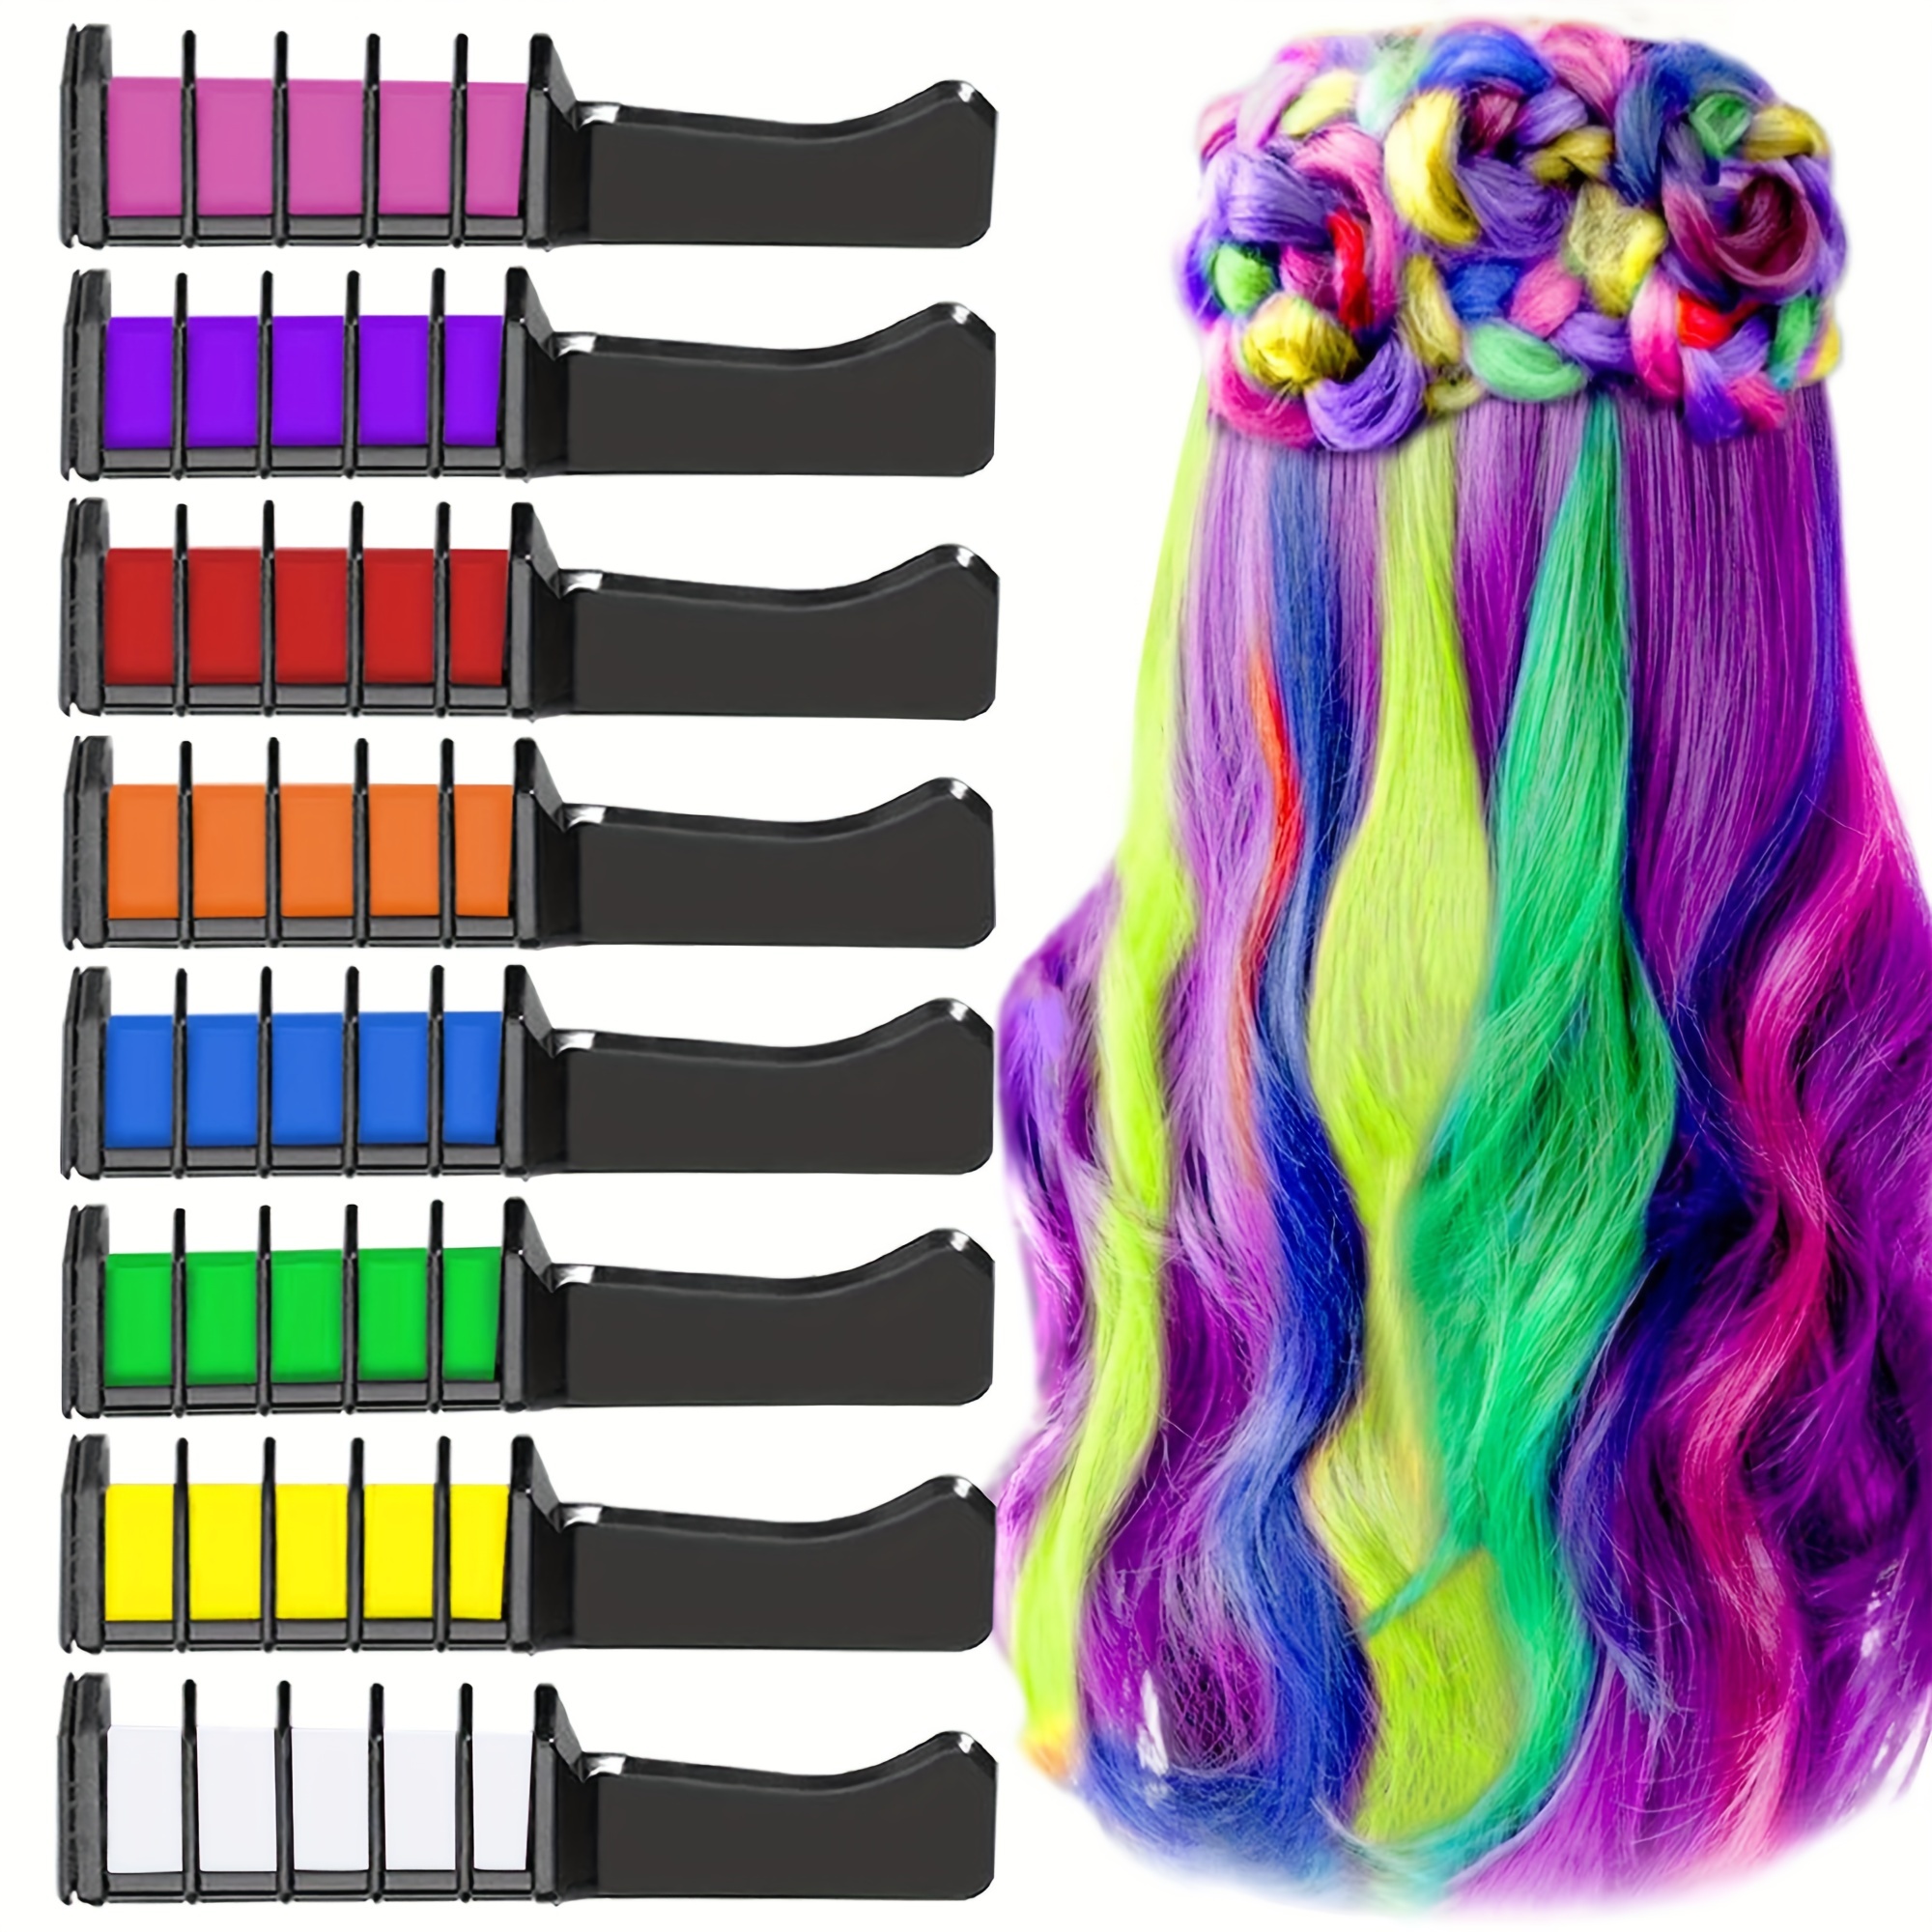 

8pcs/set Hair Chalk Comb Temporary Hair Color Dye For Girls, Washable Hair Chalk For Girls Age 4 5 6 7 8 9 10 For Birthday Cosplay Diy, Halloween, Christmas